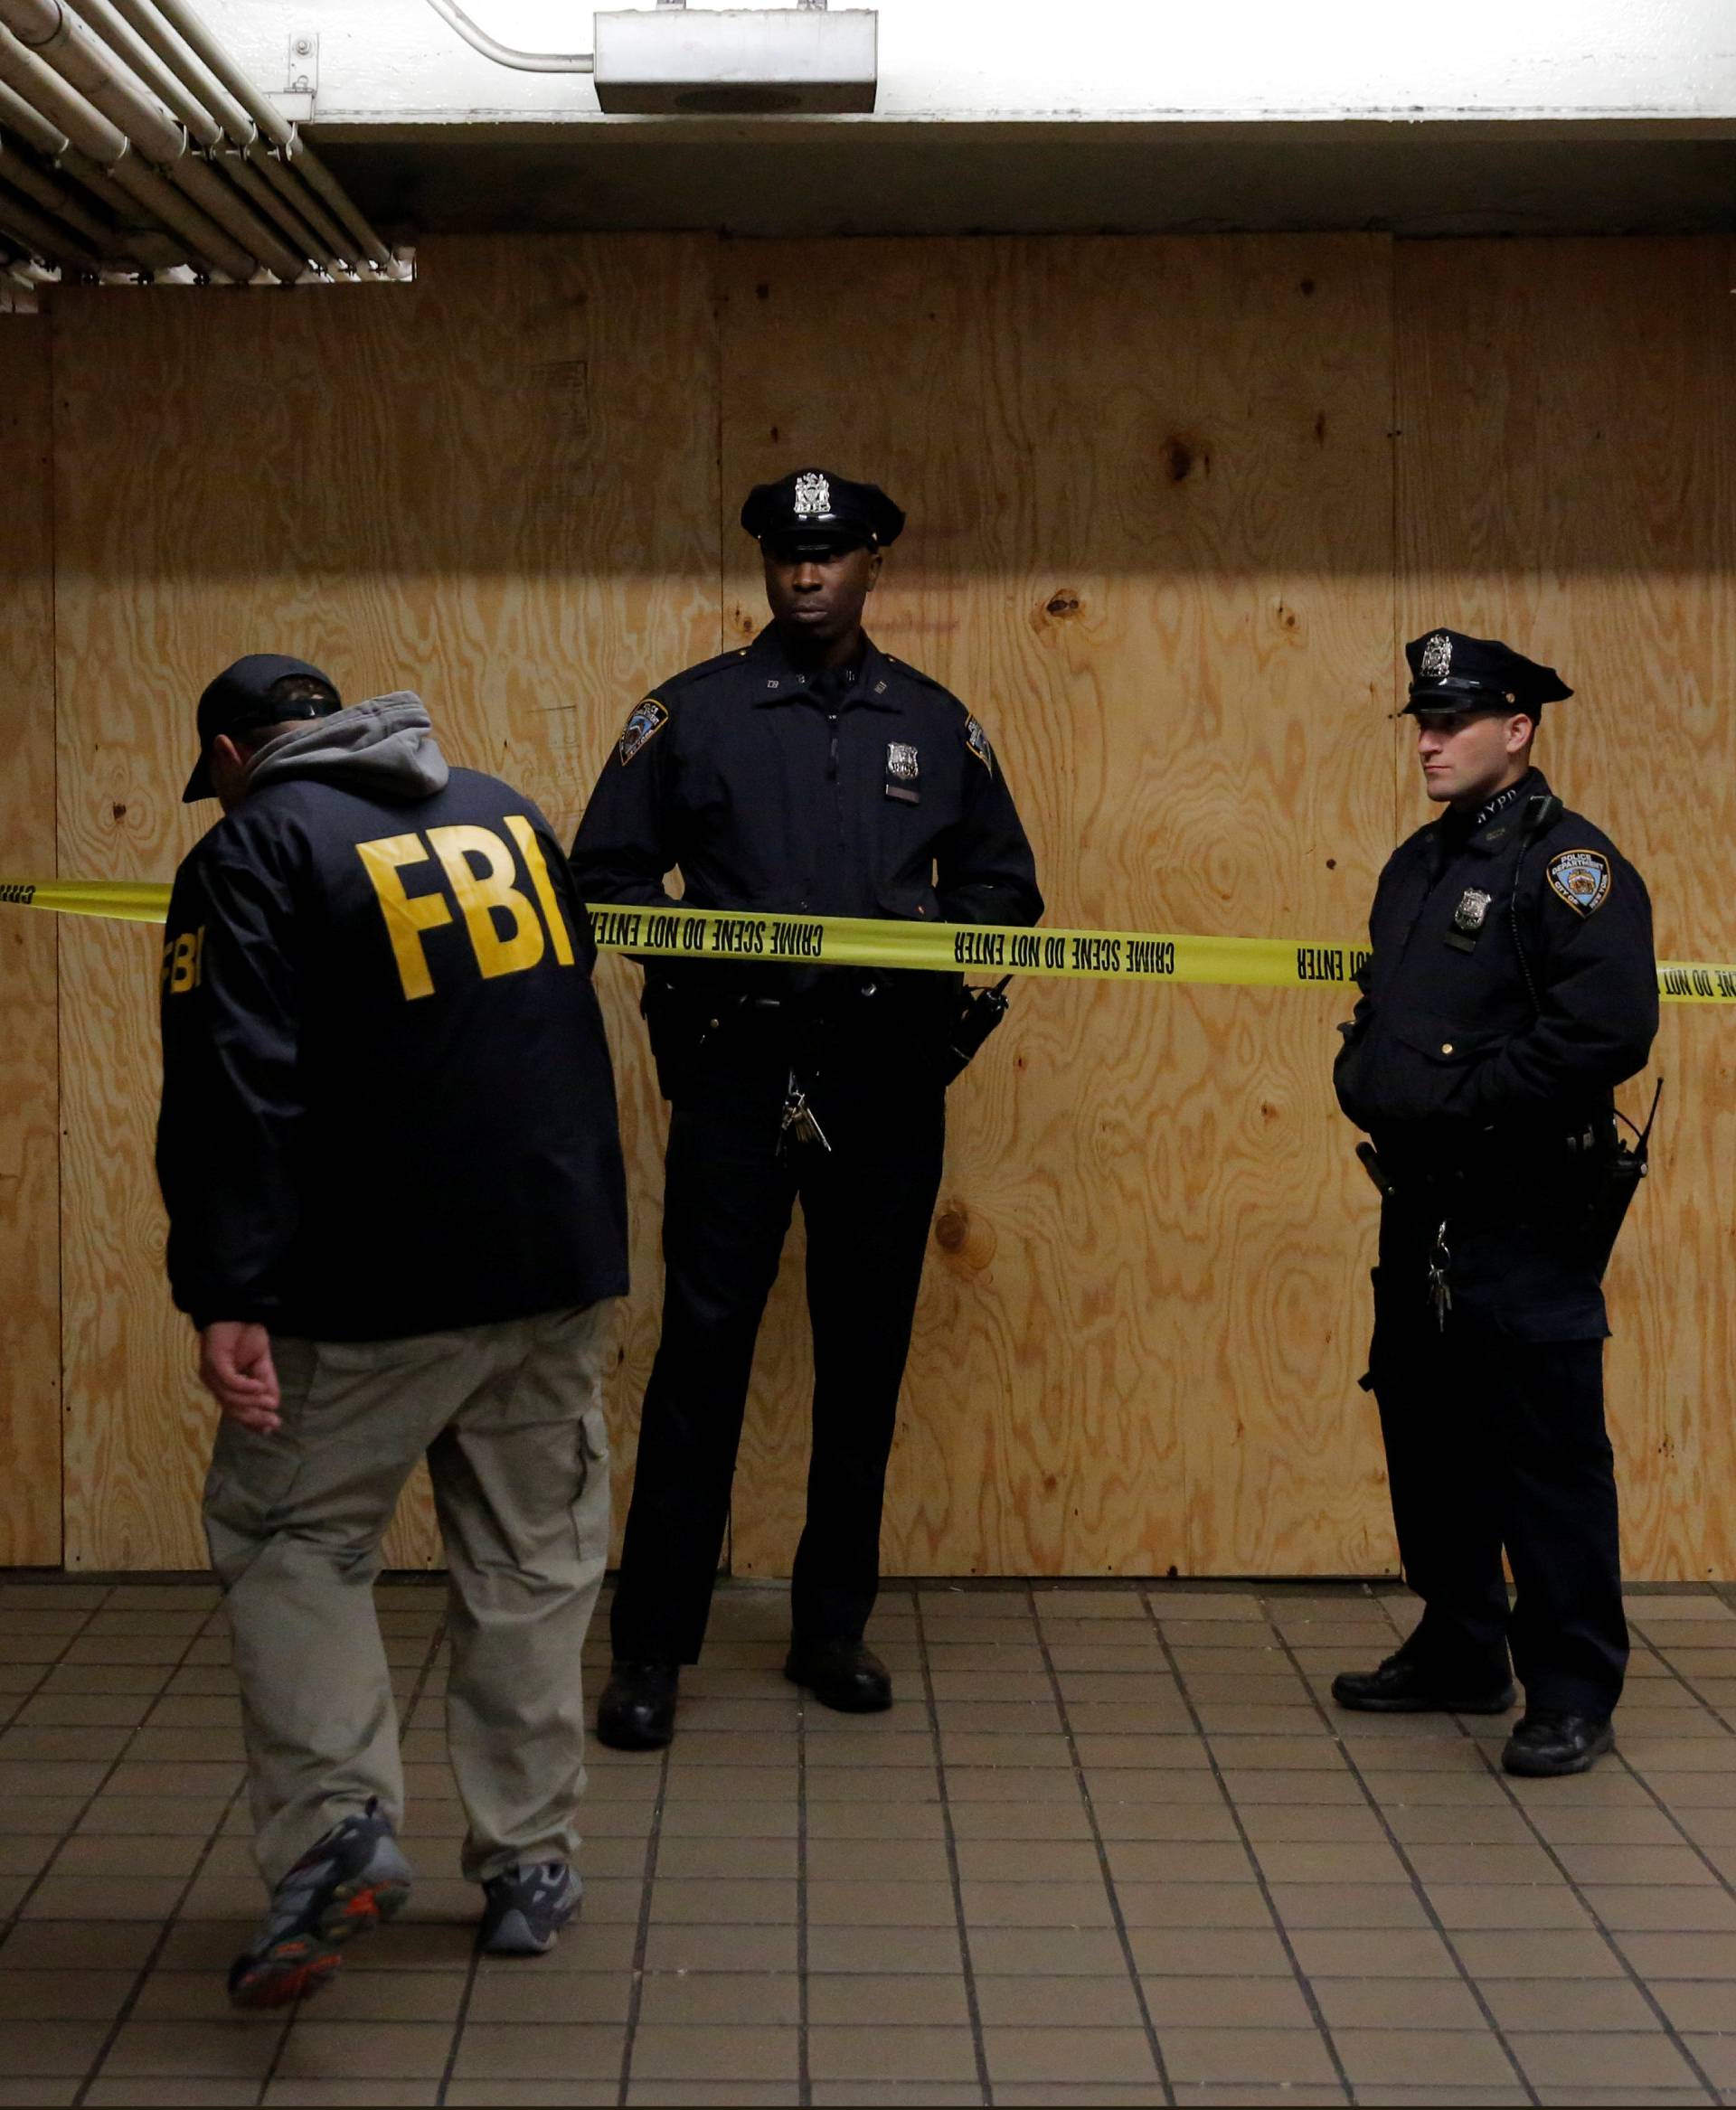 A member of the FBI enters the crime scene beneath the New York Port Authority Bus Terminal following an attempted detonation during the morning rush hour, in New York City